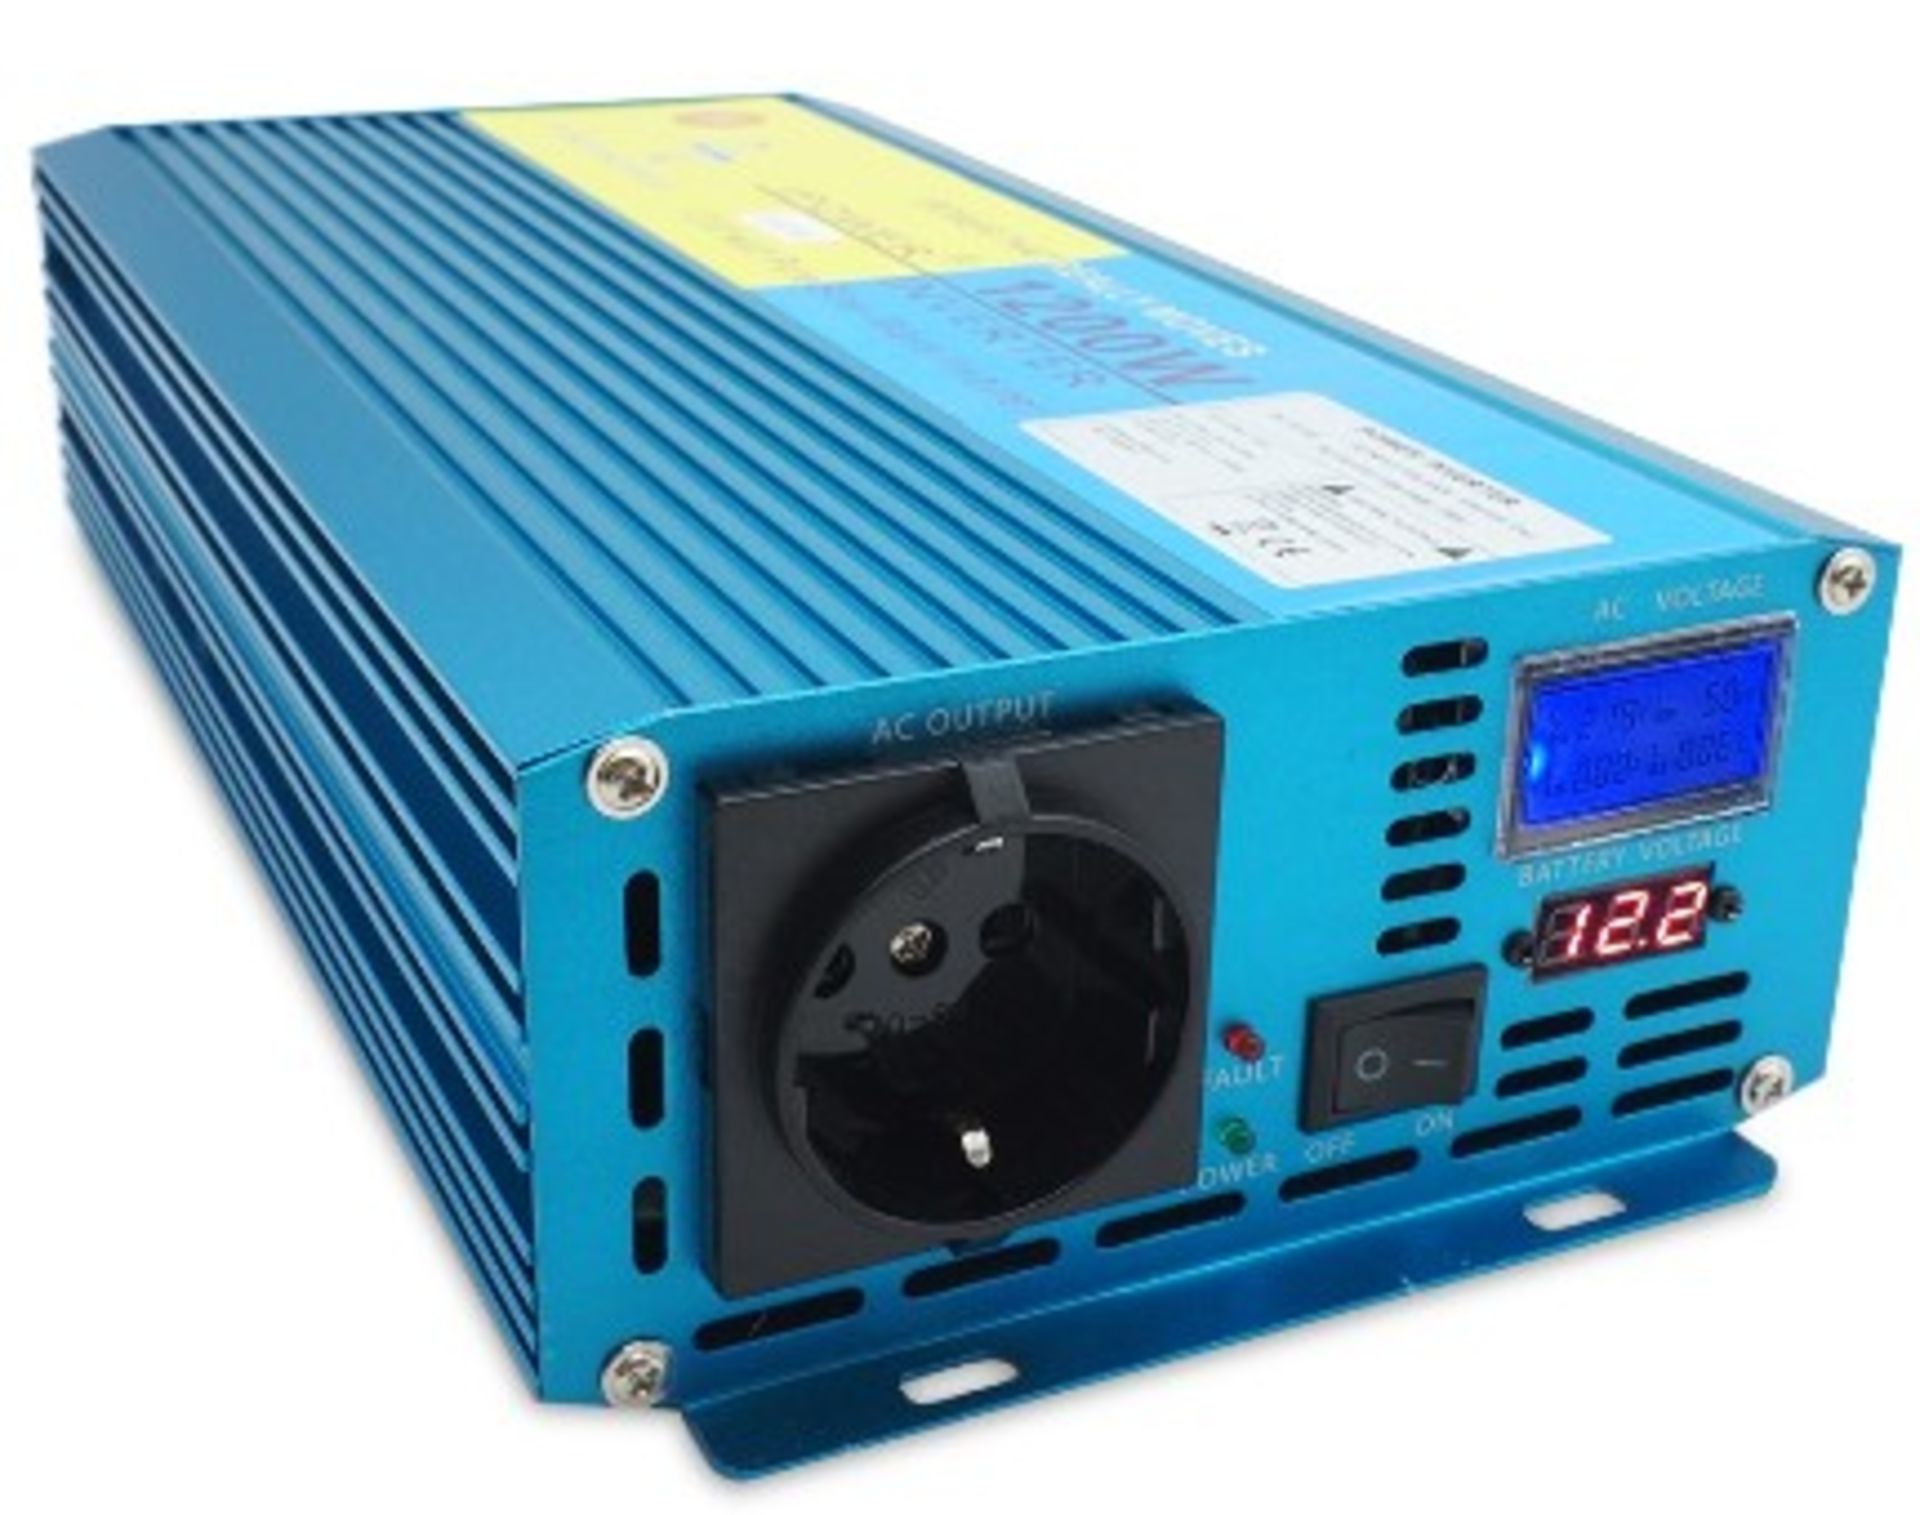 A boxed as new Luyuanipower DX-GAC1200W Power Inverter. 12V DC to 230V AC convertor with LCD